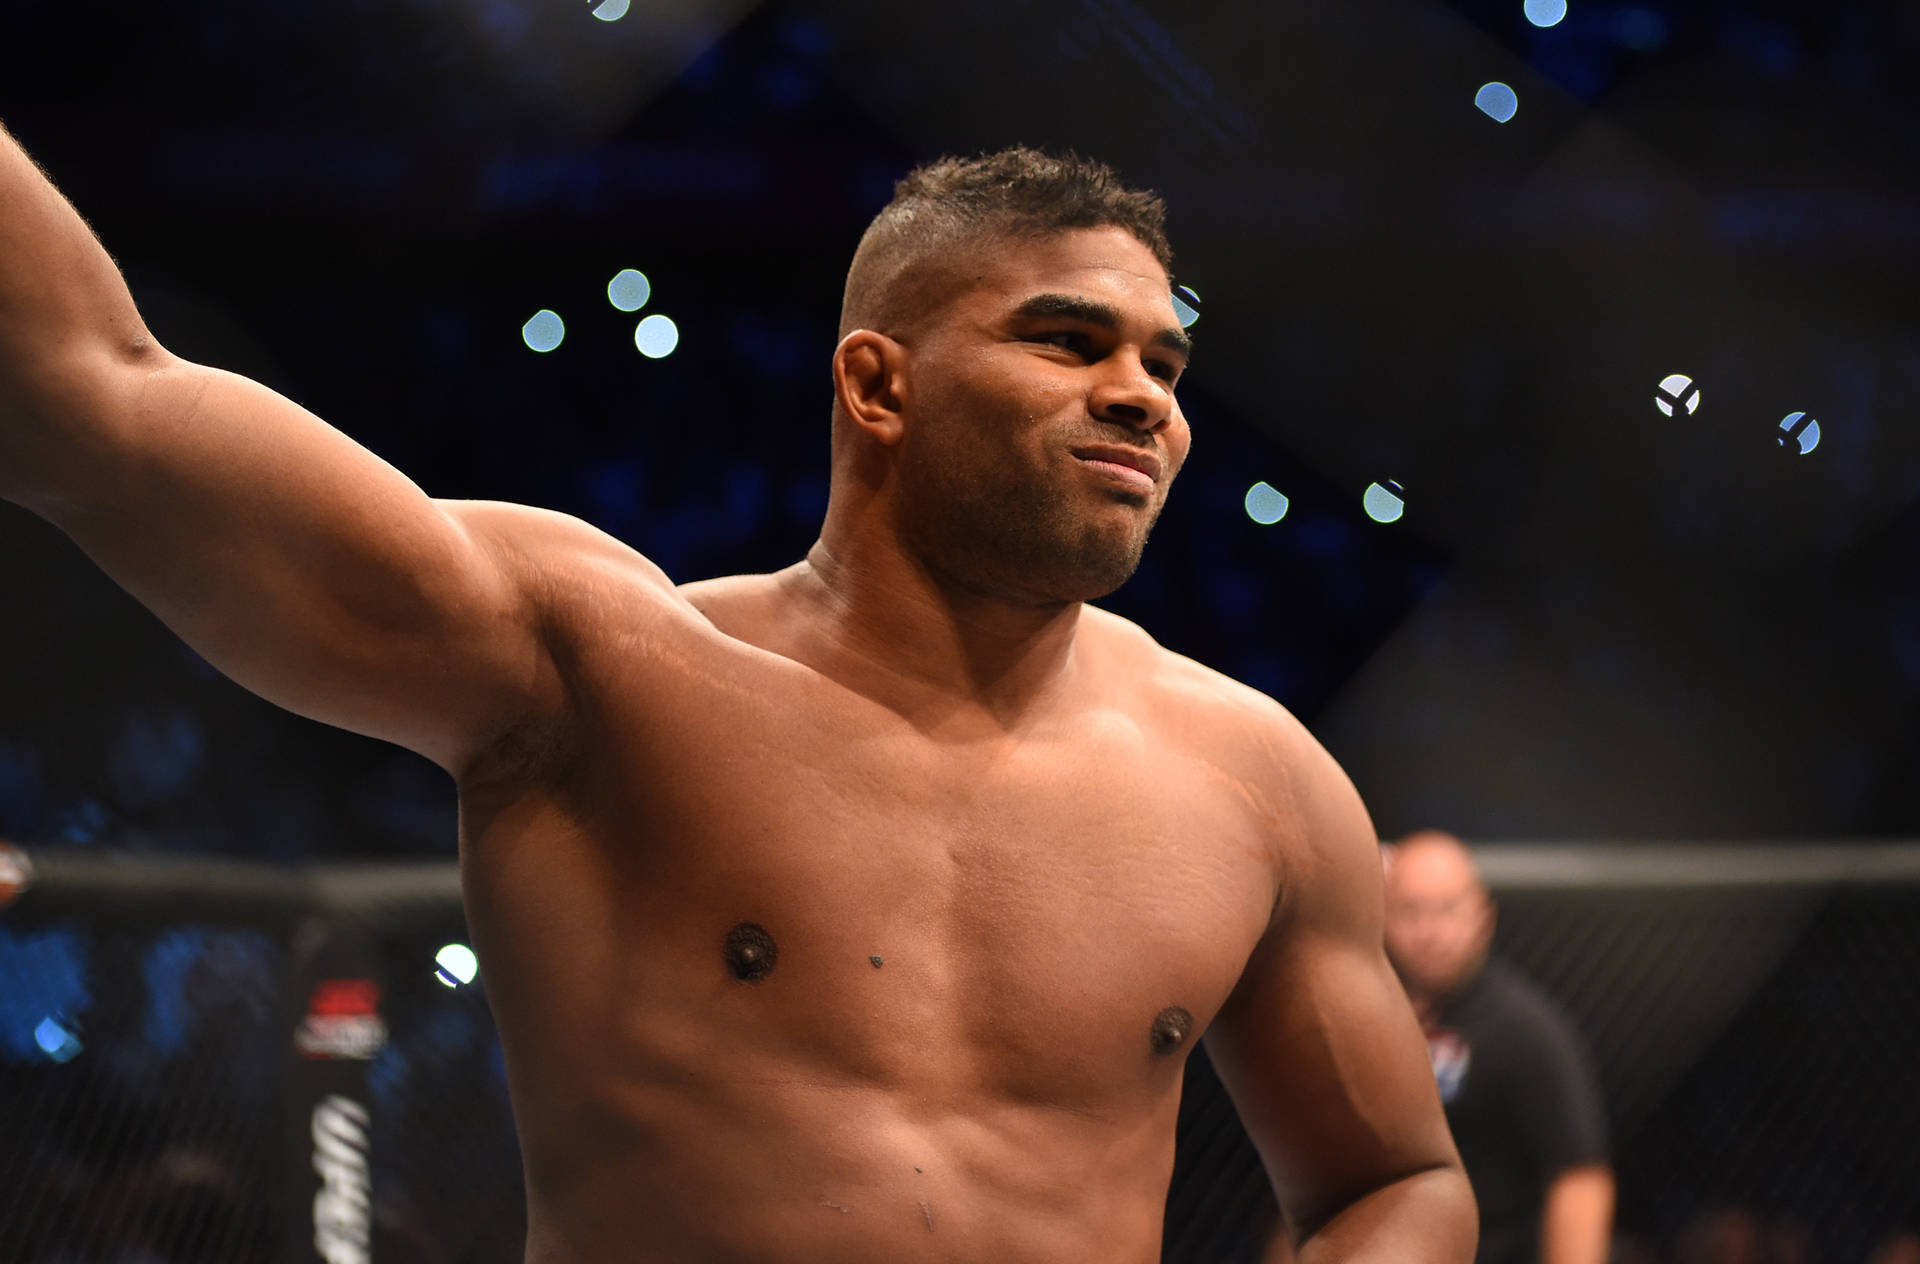 MMA Fighter Alistair Overeem Smiling Widely Wallpaper